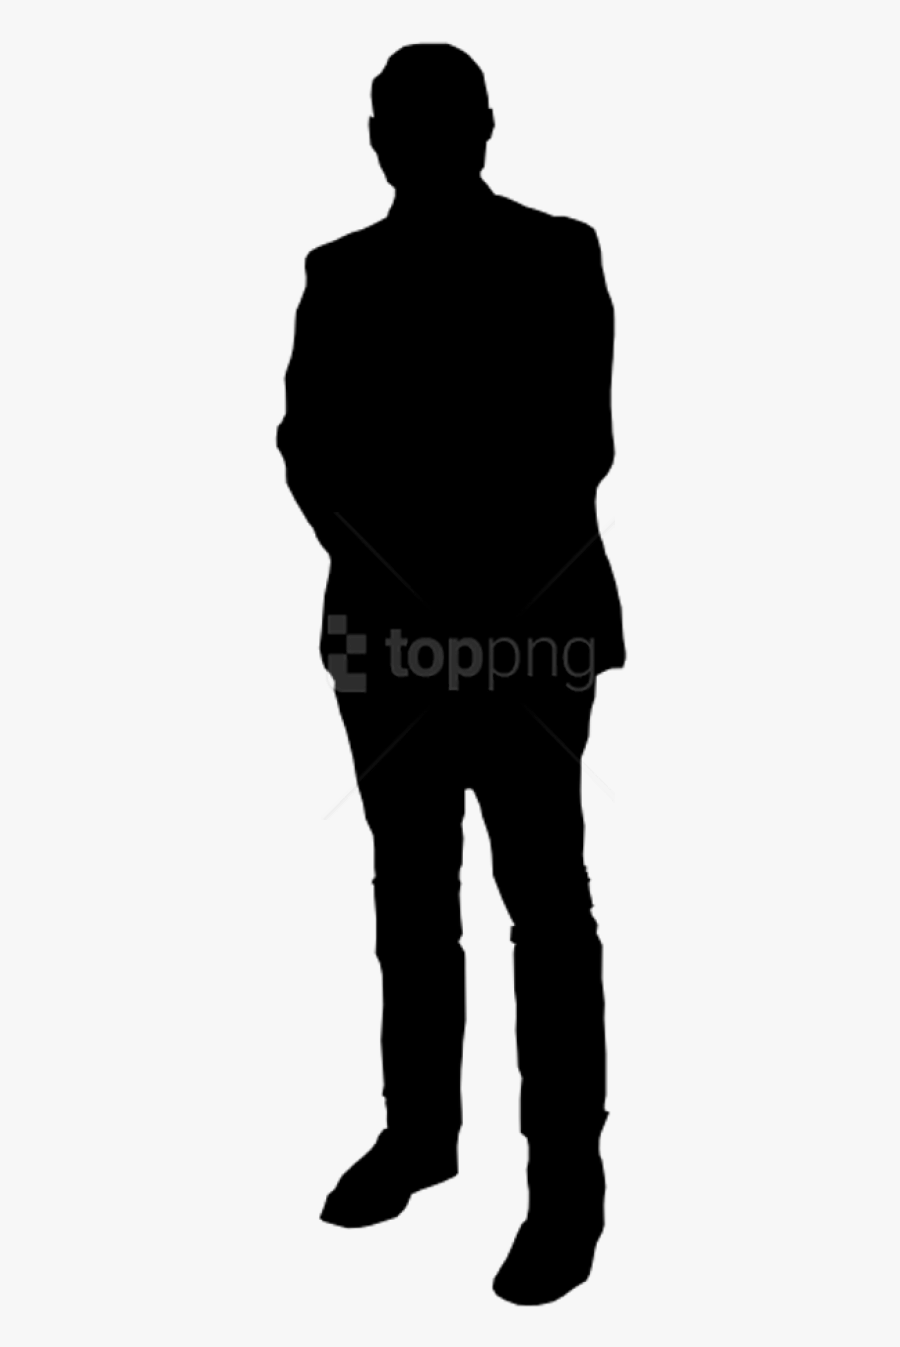 Free Images Toppng - Silhouette Man Standing Straight, Transparent Clipart